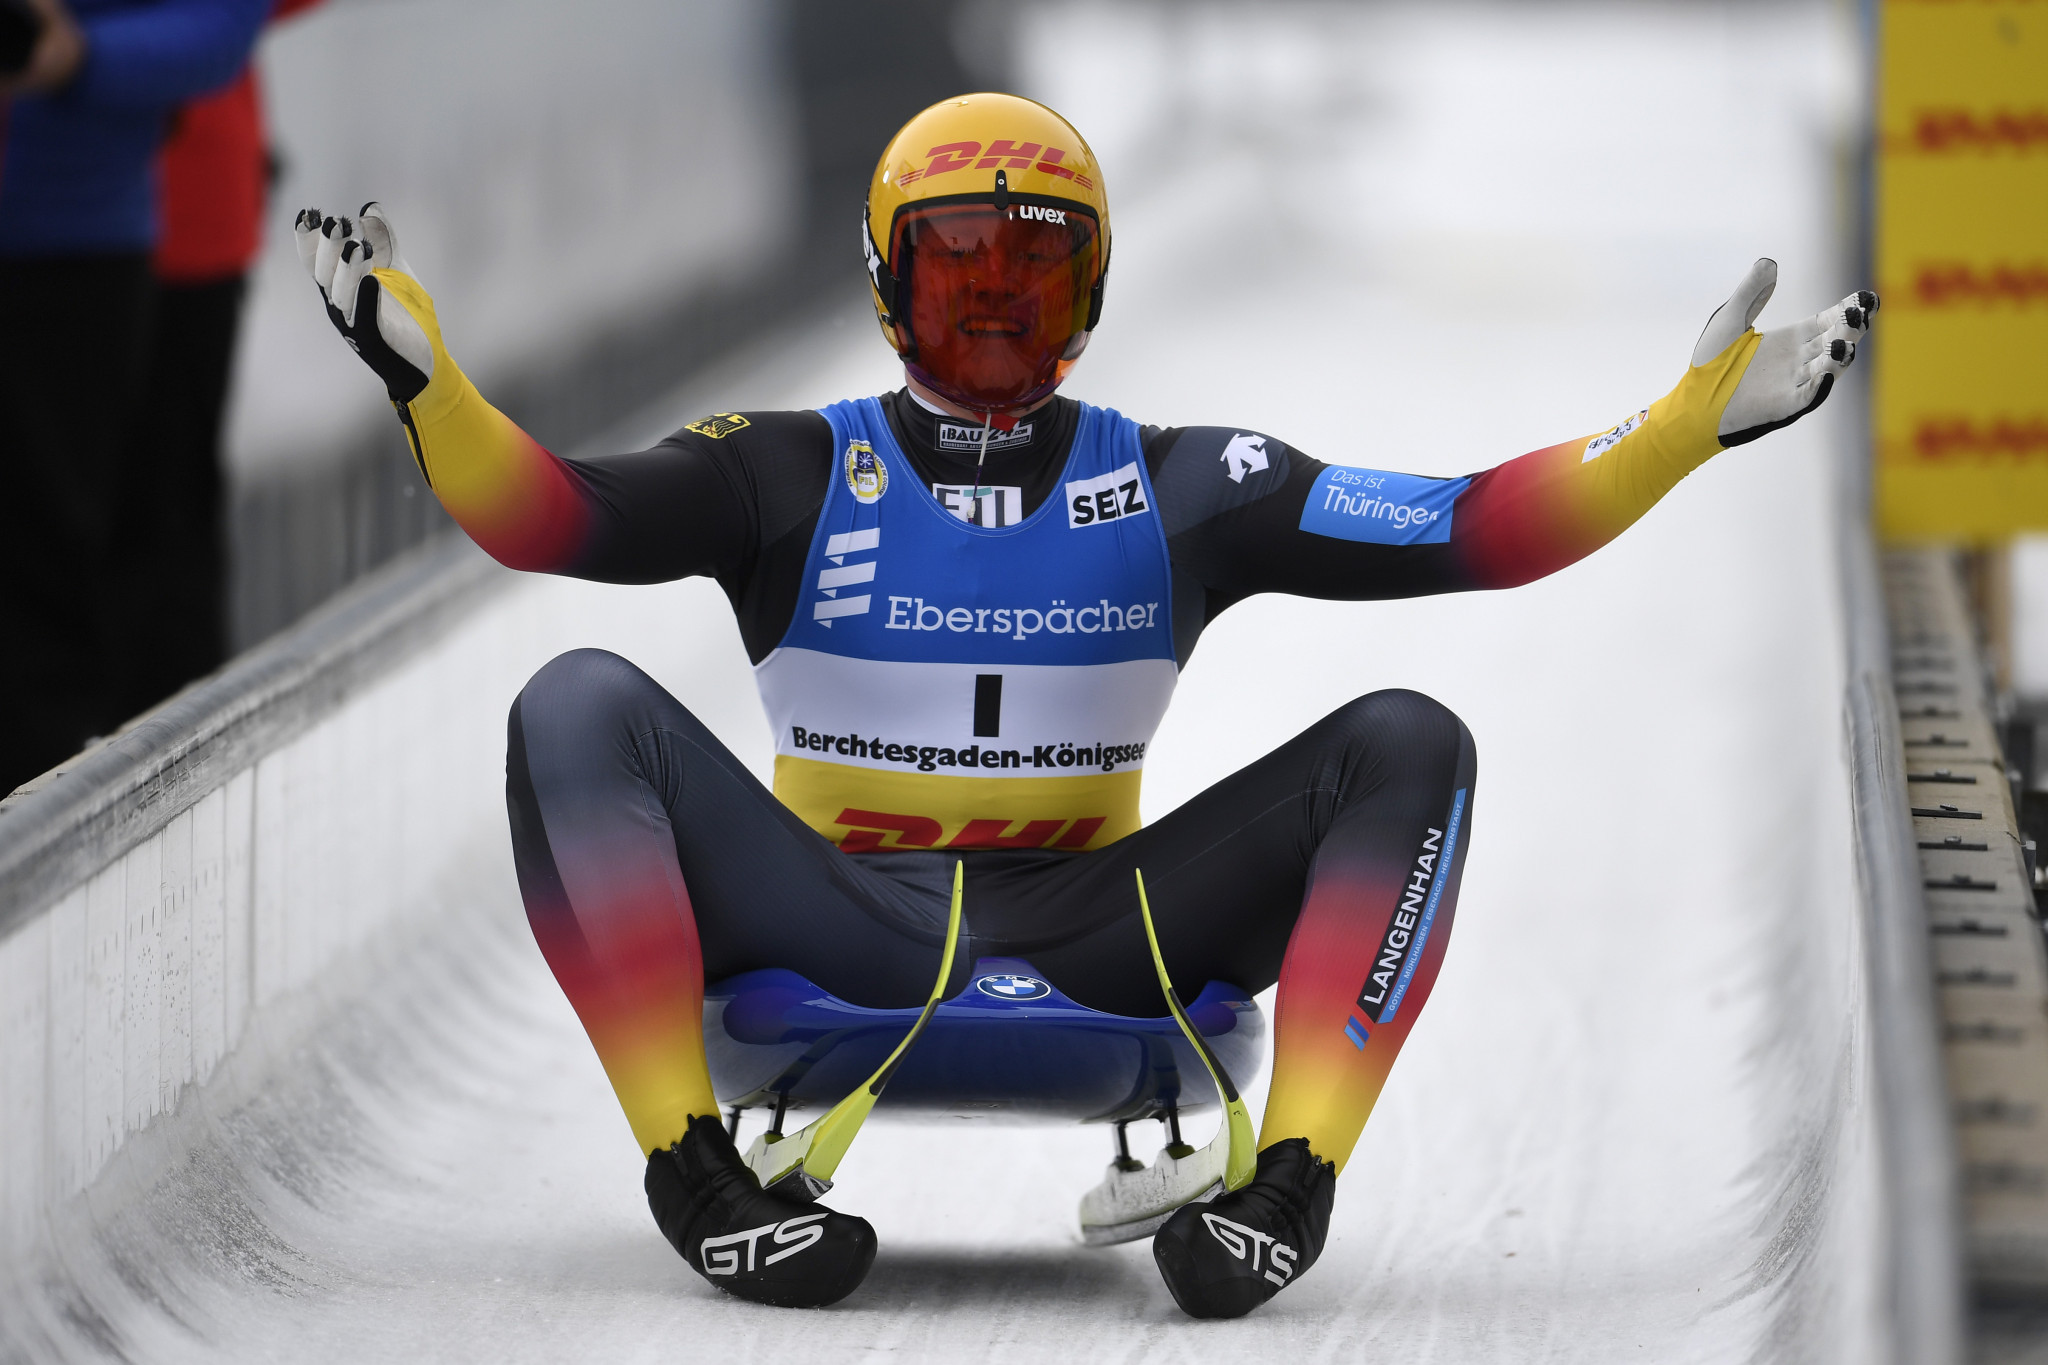 Max Langenhan of Germany is second in the men's singles World Cup standings, and earned the first shared gold medal for 10 years last weekend ©Getty Images